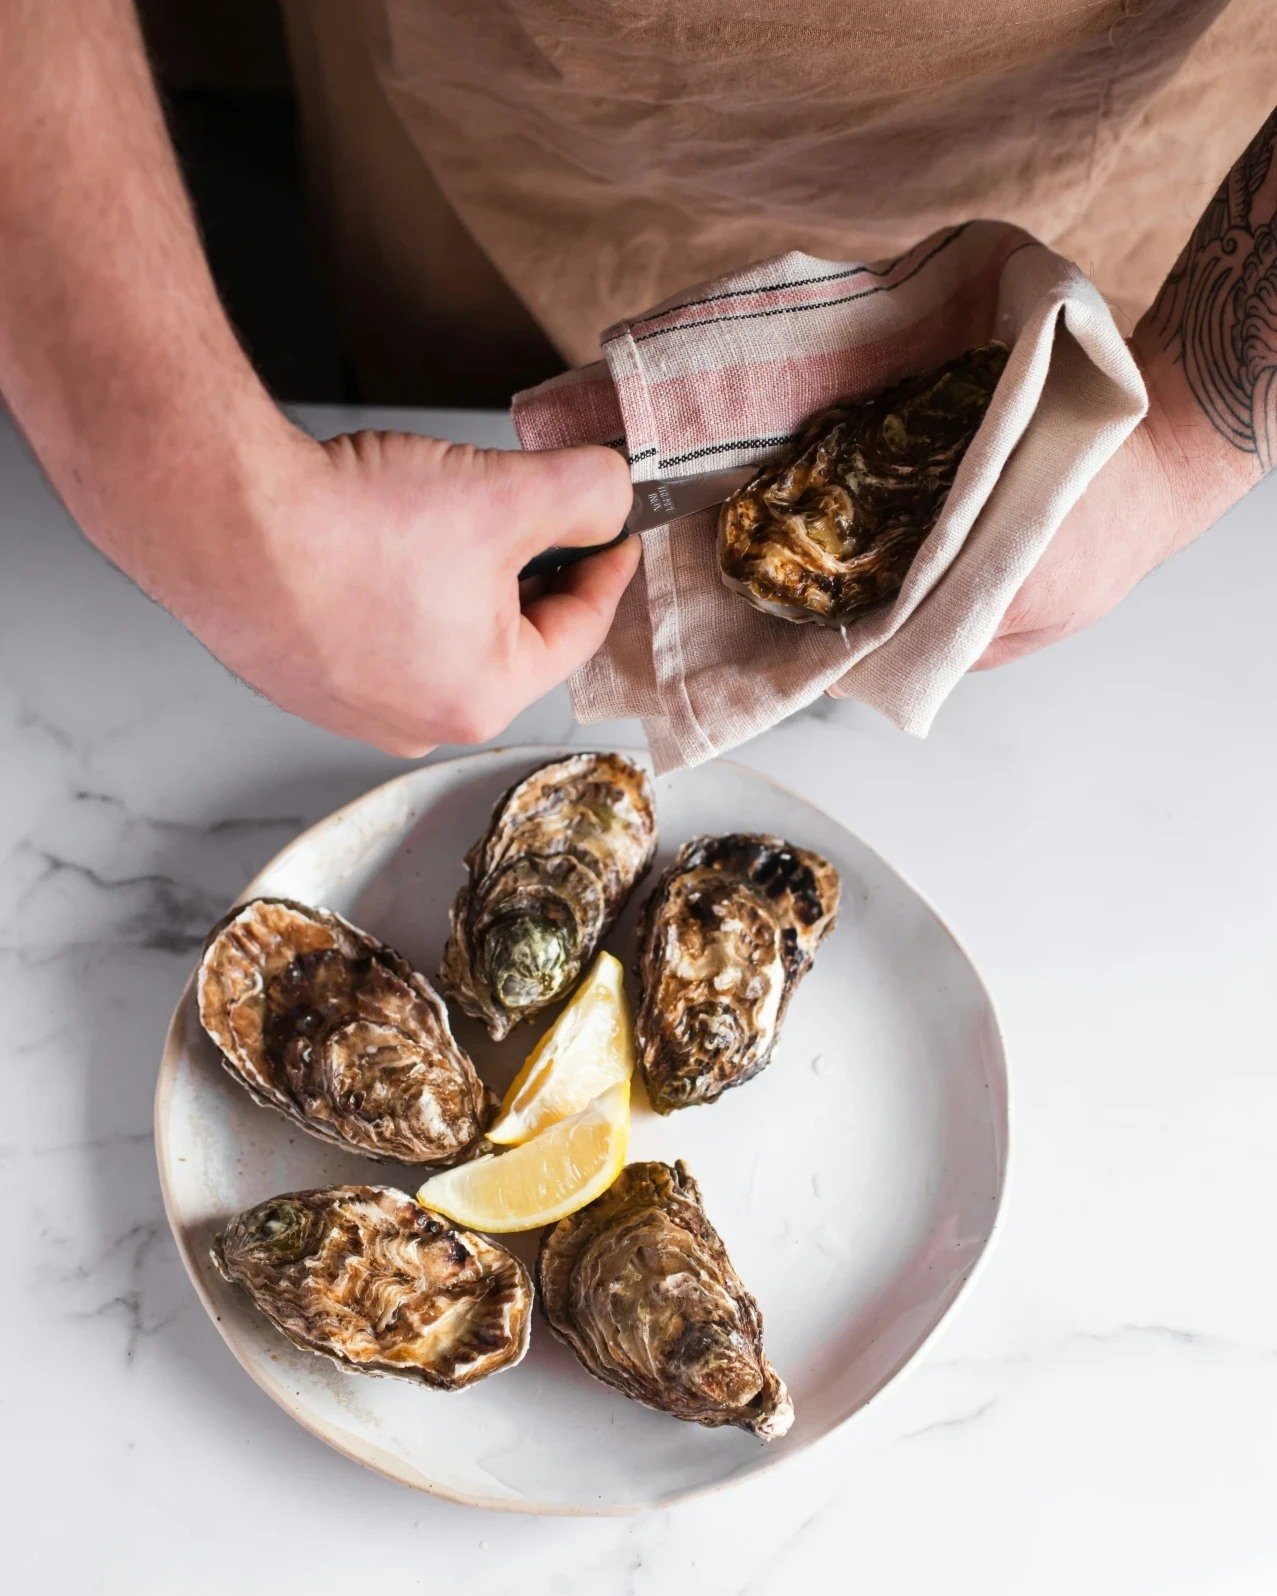 Oysters and marble: a pairing of elegance and sophistication. The smooth, cool surface of marble complements the briny richness of oysters, creating a dining experience that's as luxurious as it is delicious. Indulge in this exquisite combination and